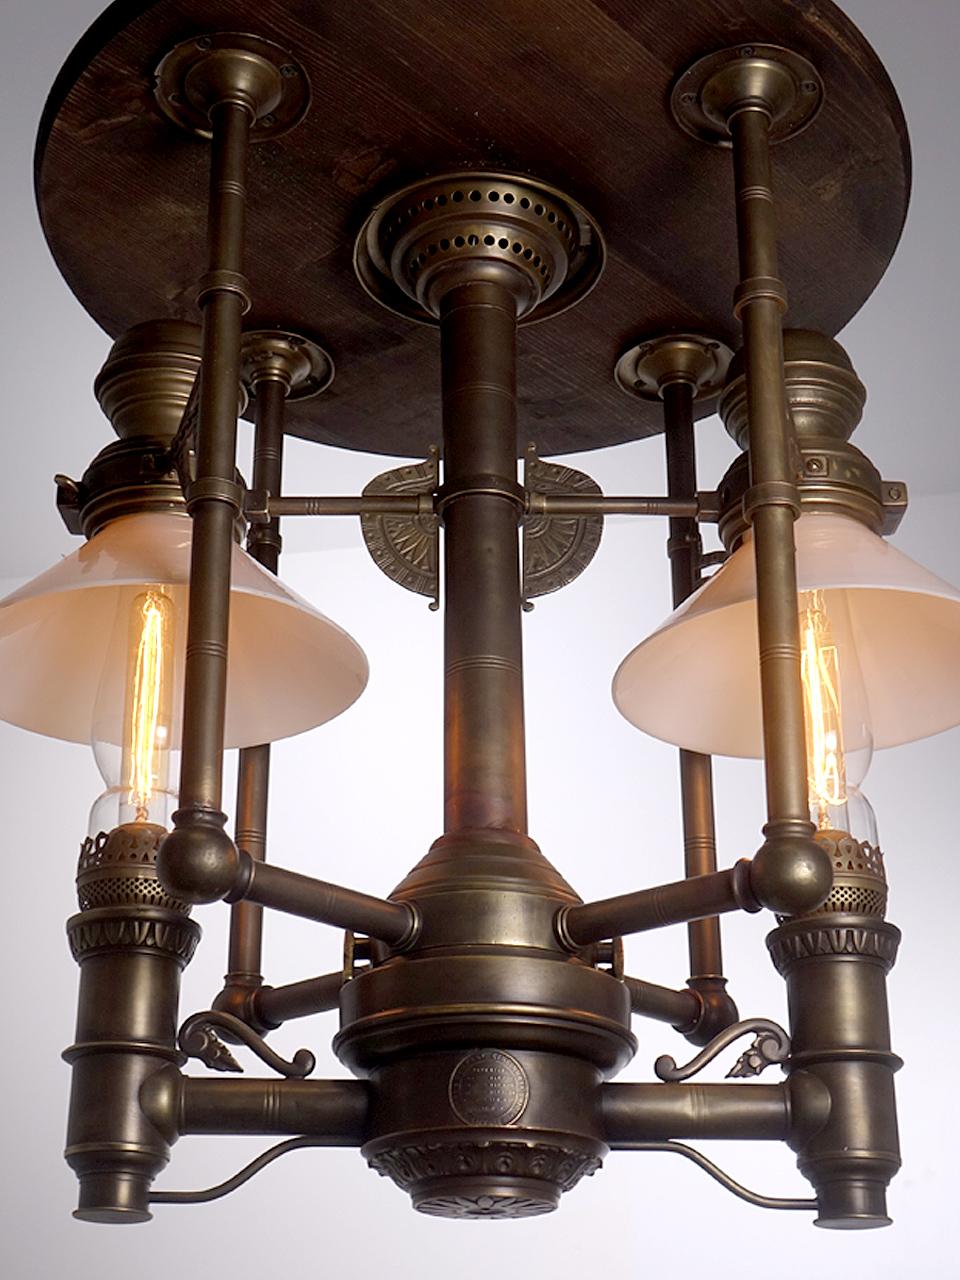 19th Century Museum Quality Post and Company Rail Car Center Lamp